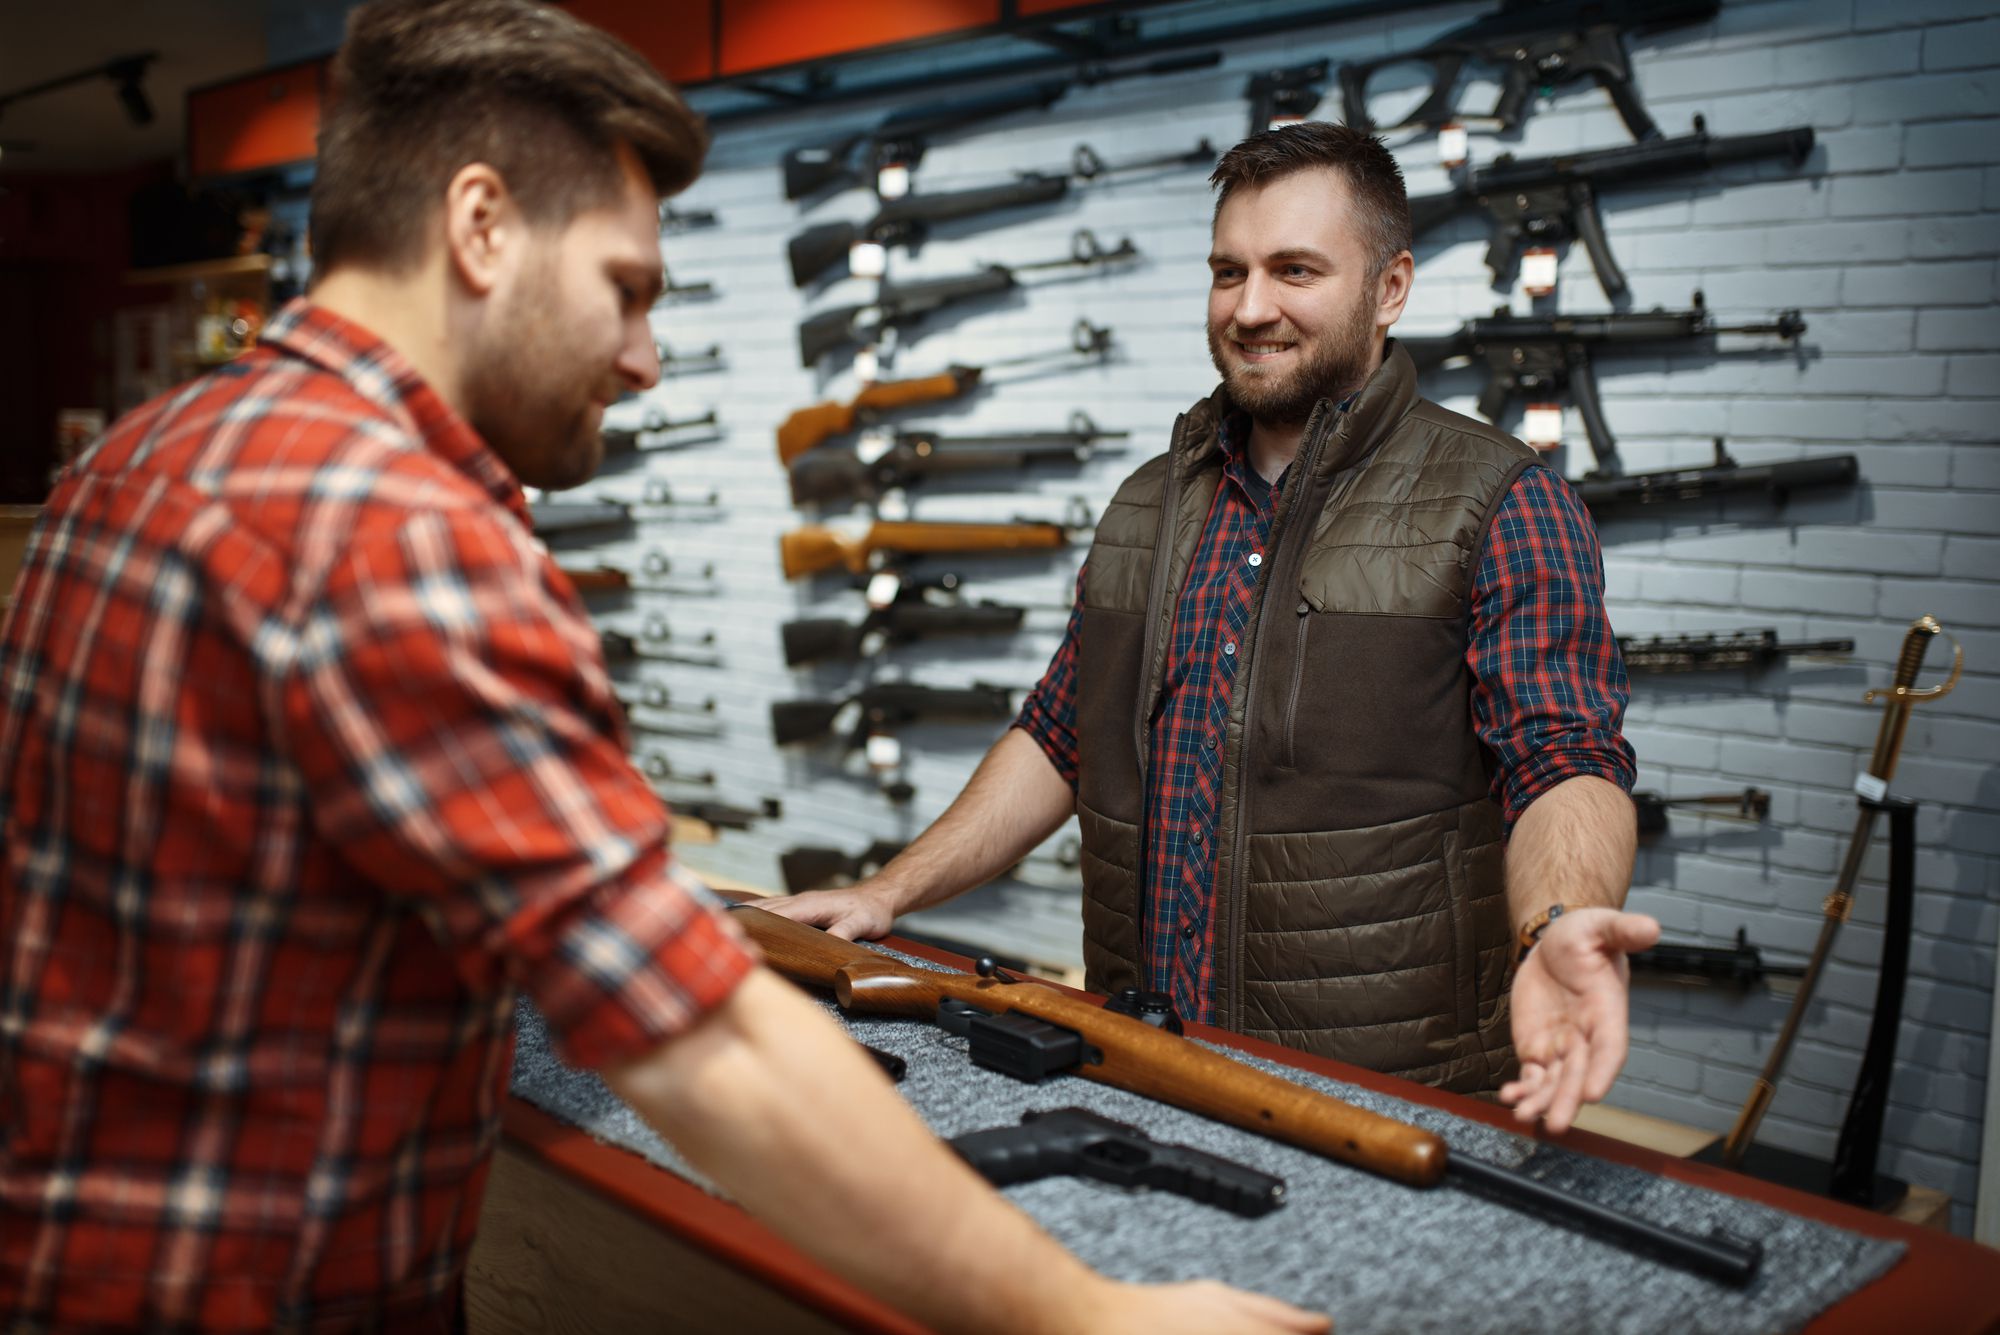 <p>Before making this sweeping statement, perhaps consider the background checks, waiting periods, and federal and state laws that exist. "Easy" is a relative term and assumes that current laws aren't stringent or effective.</p>